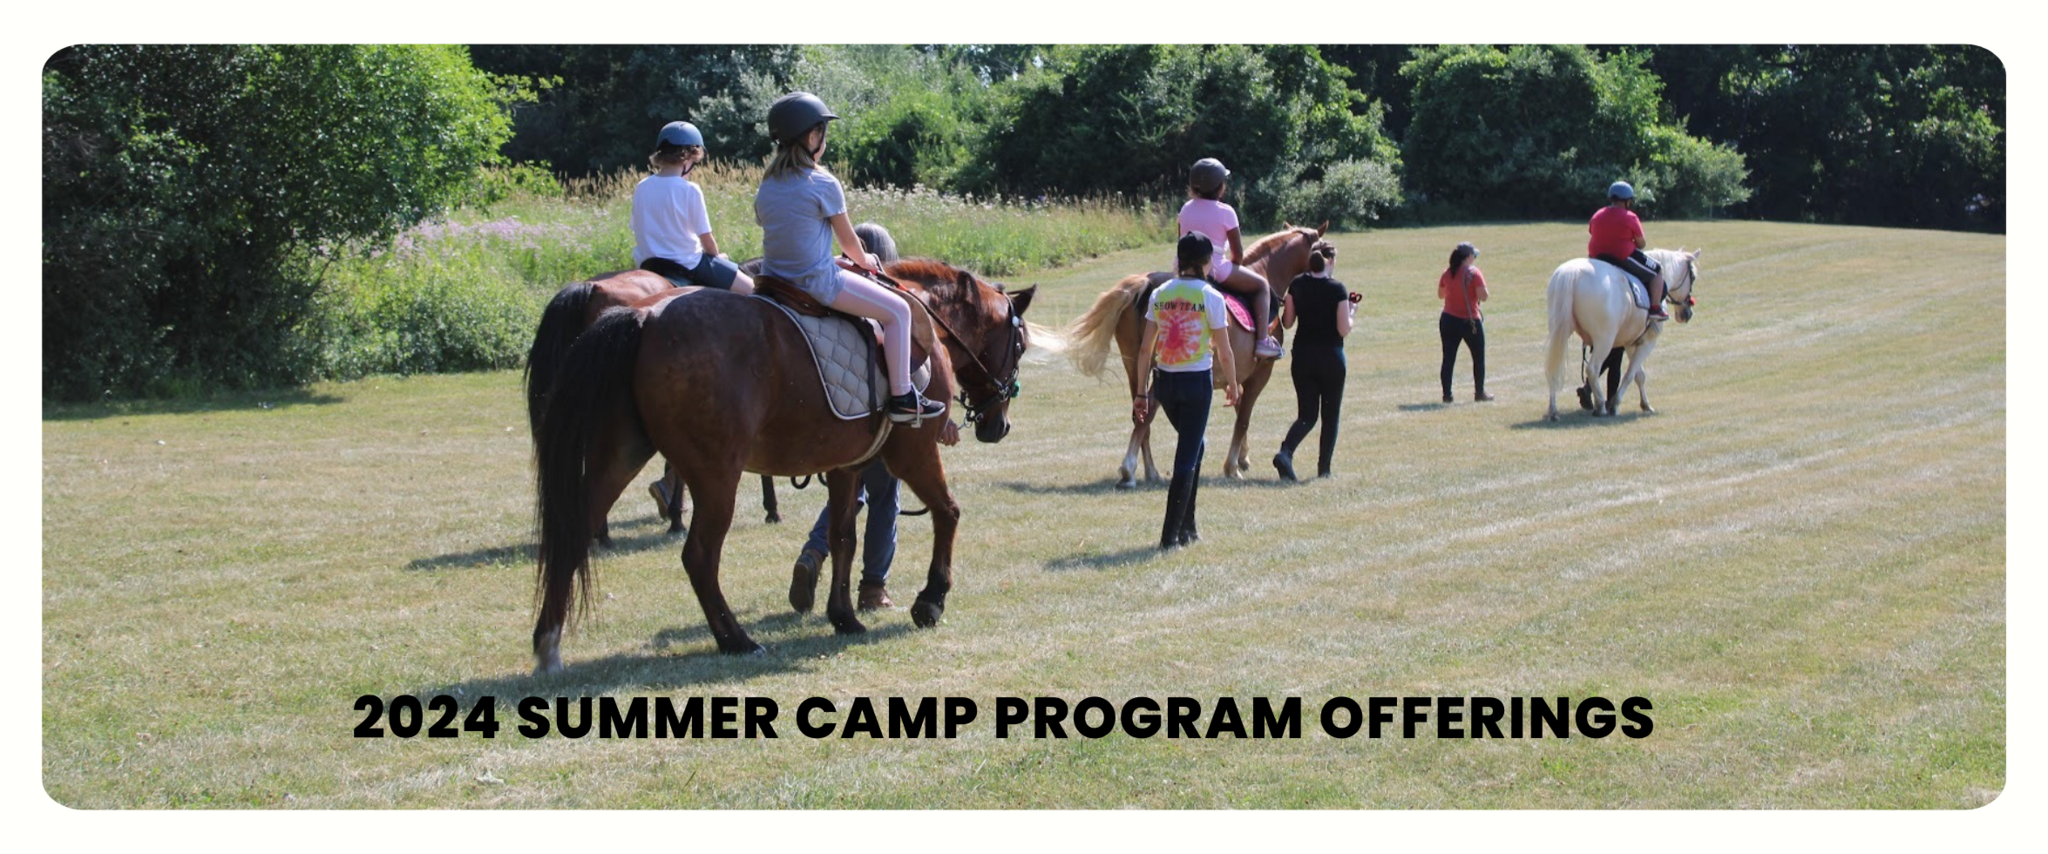 2024 Summer Camp Program Offerings showing students riding horses